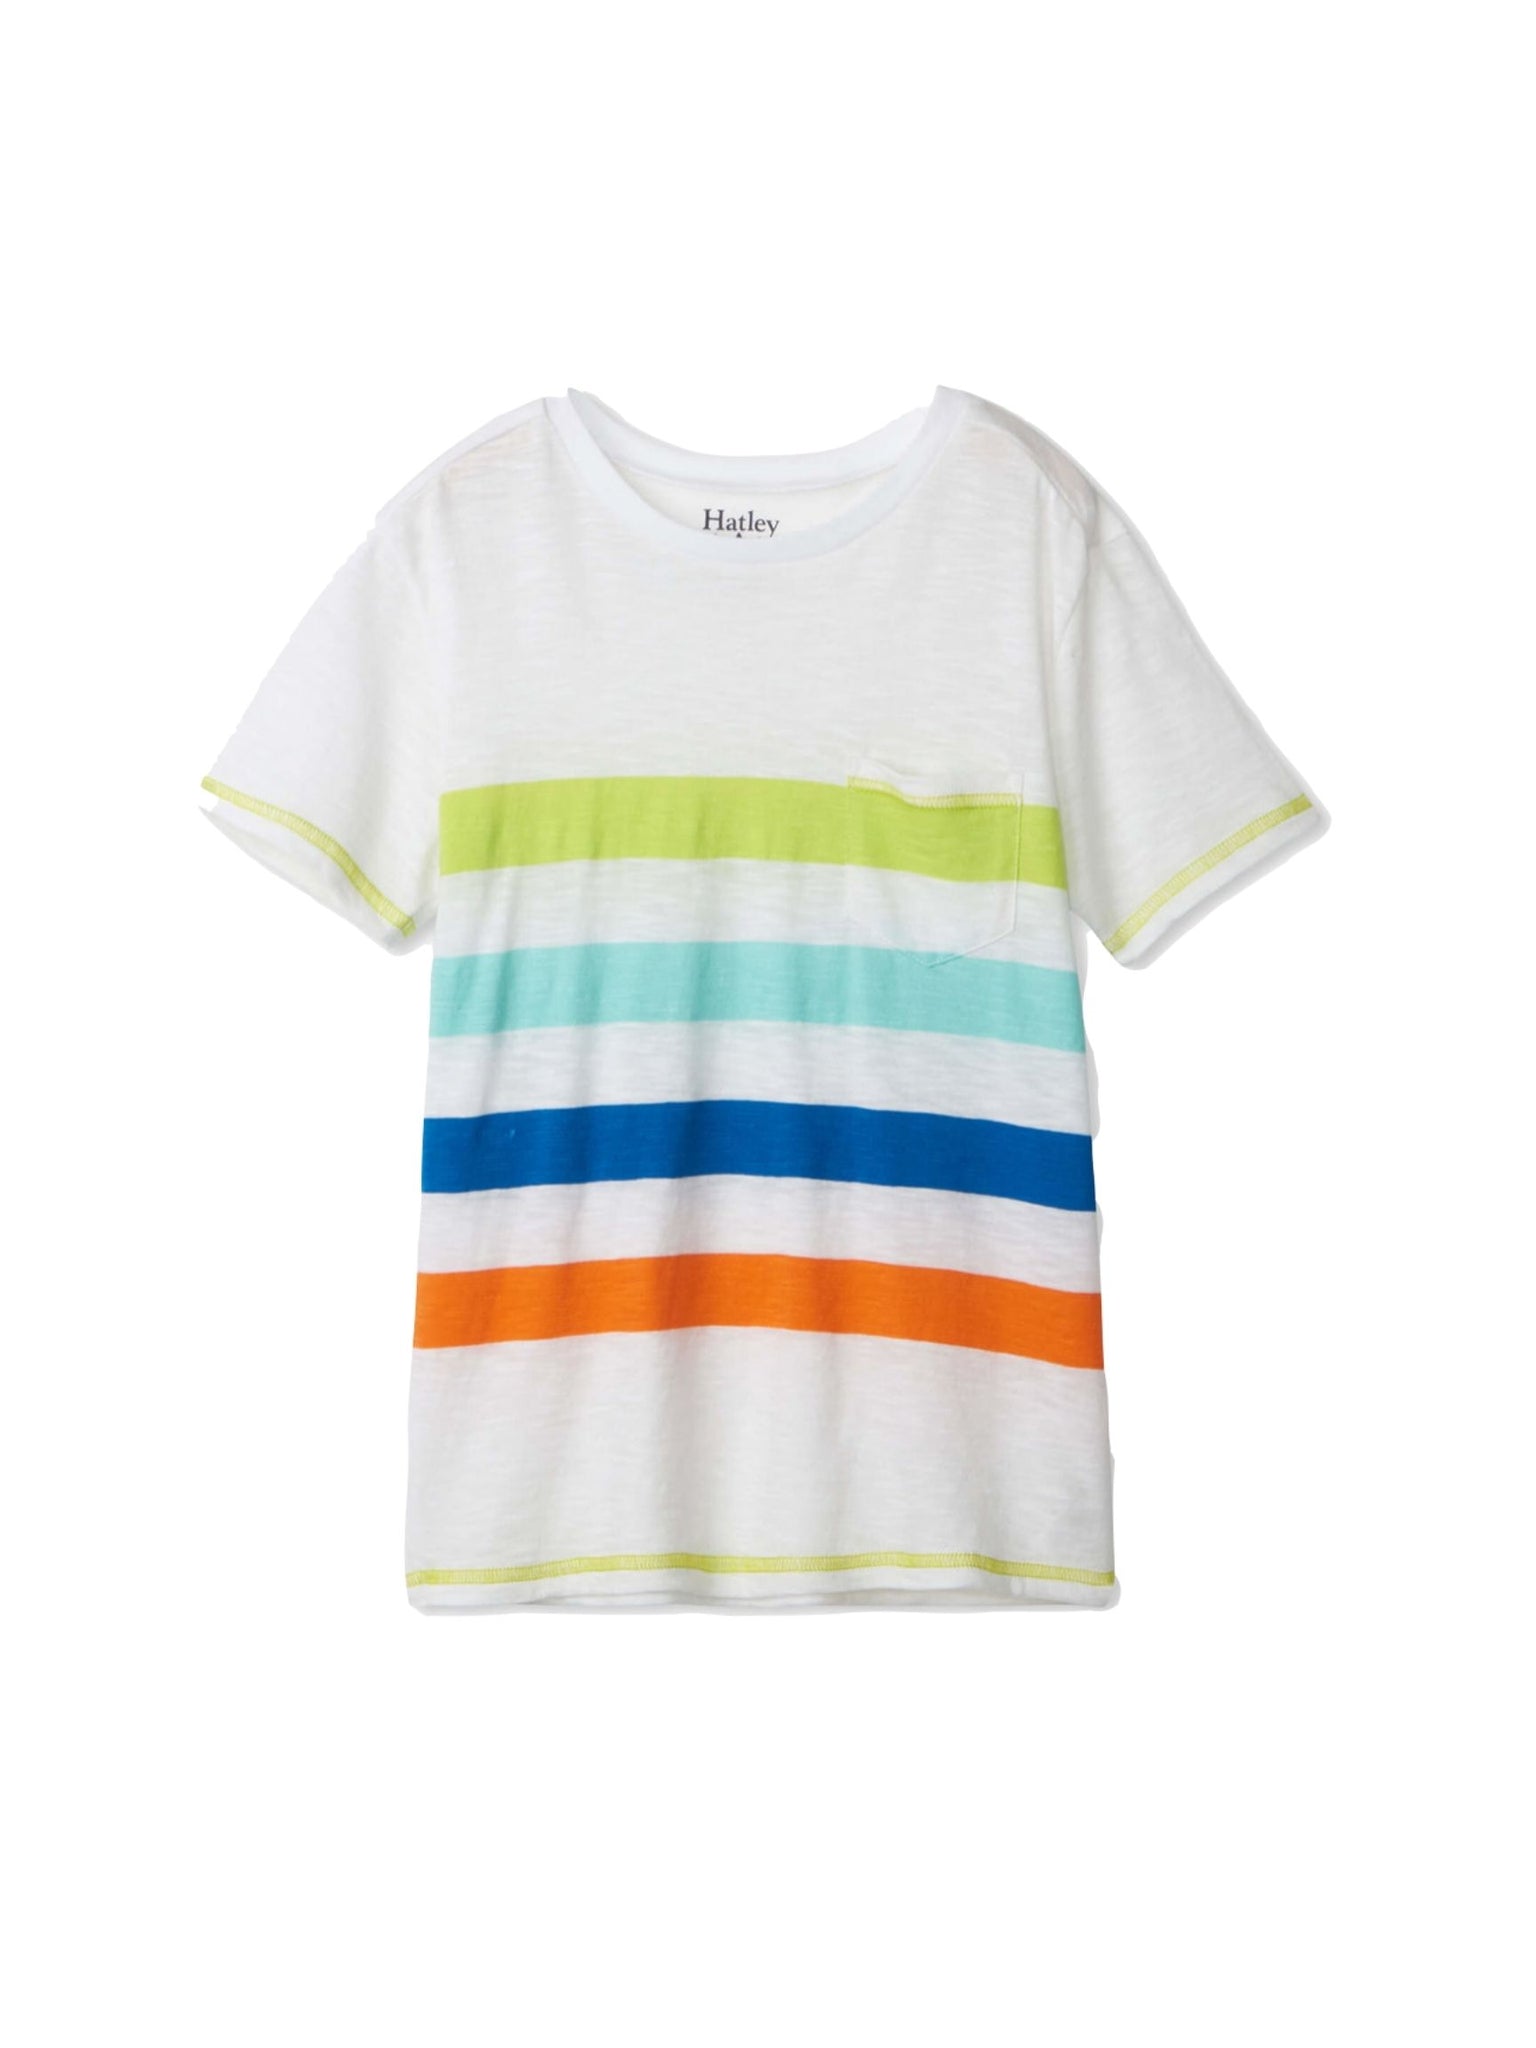 short sleeved white tee with green, teal, blue and orange stripes - Hatley boys tee